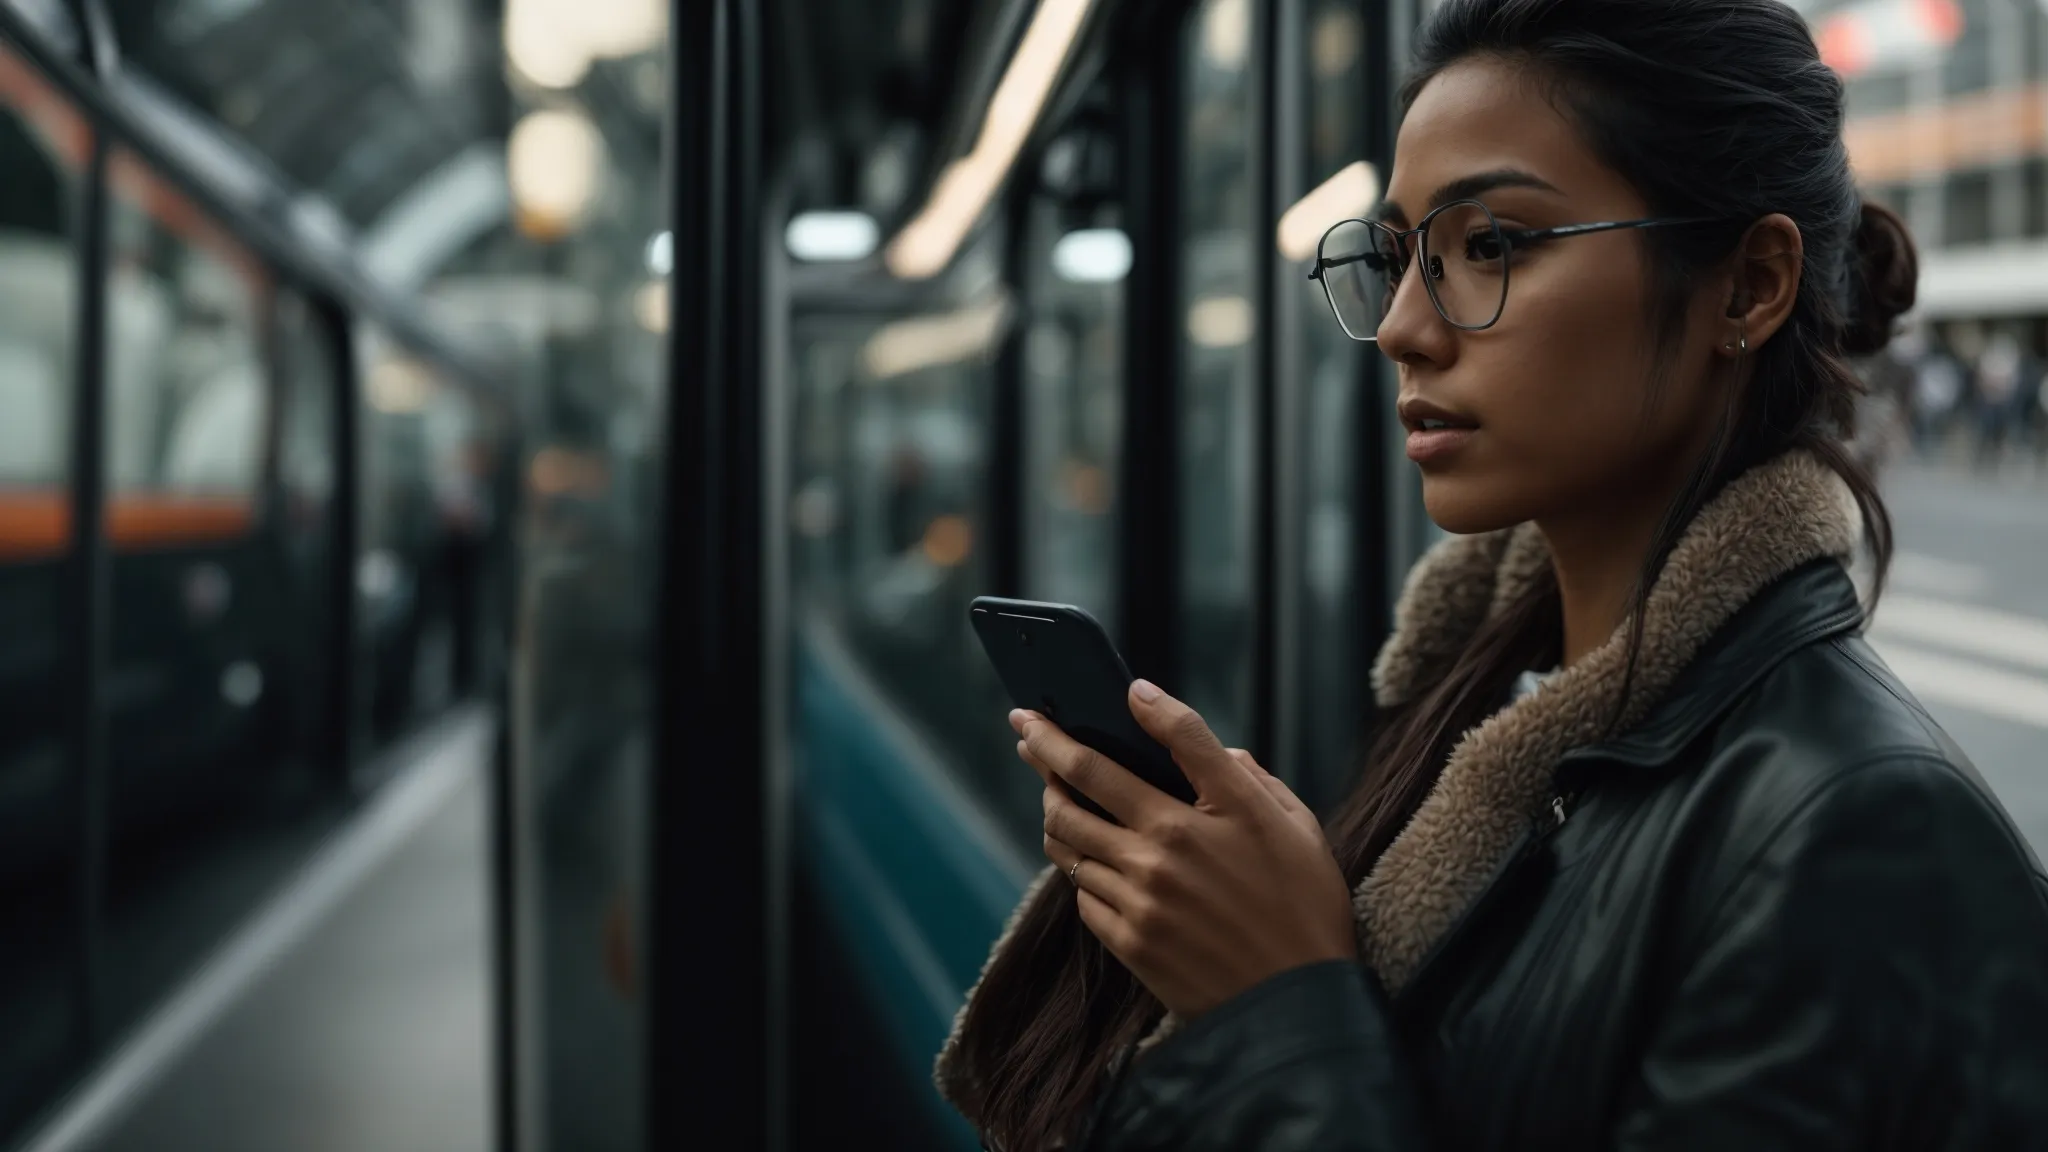 a person watching a high-resolution video on a smartphone while commuting.